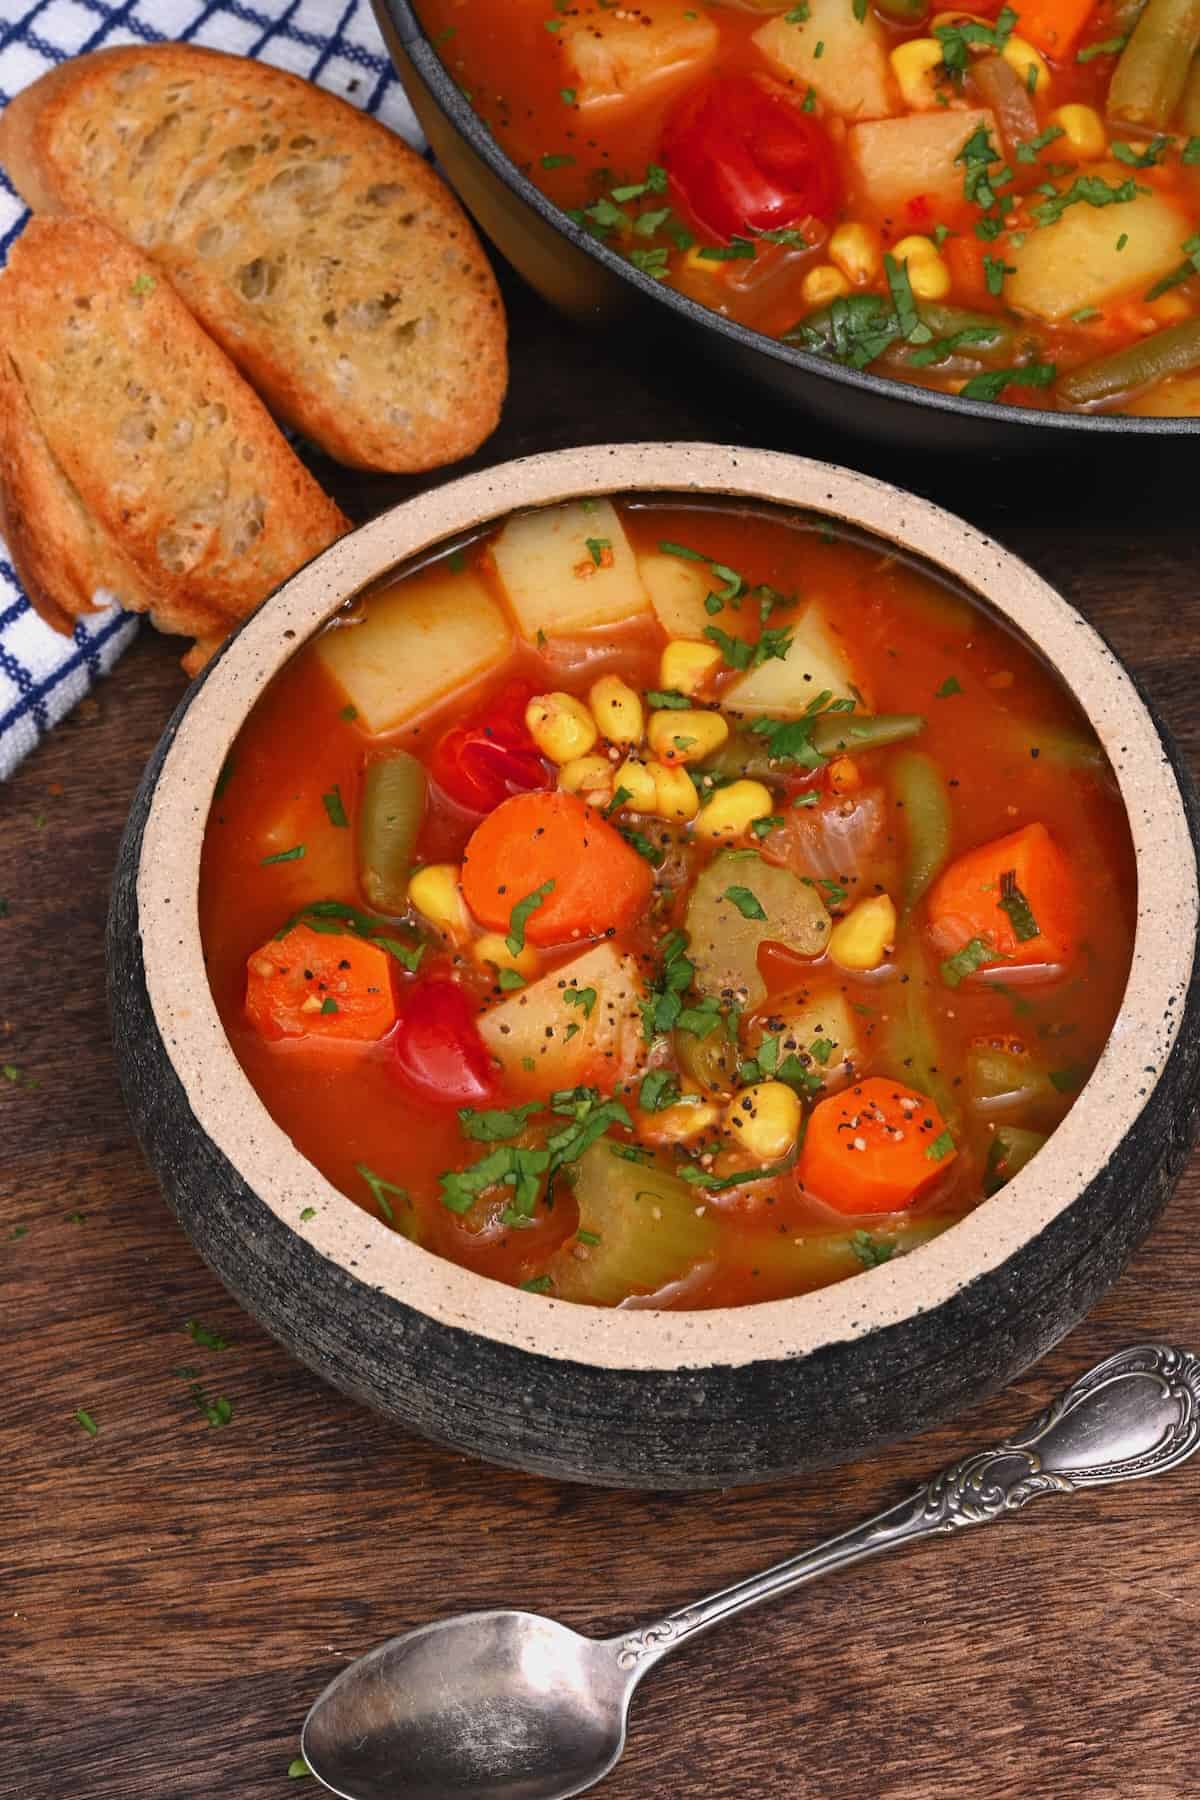 A serving of vegetable soup